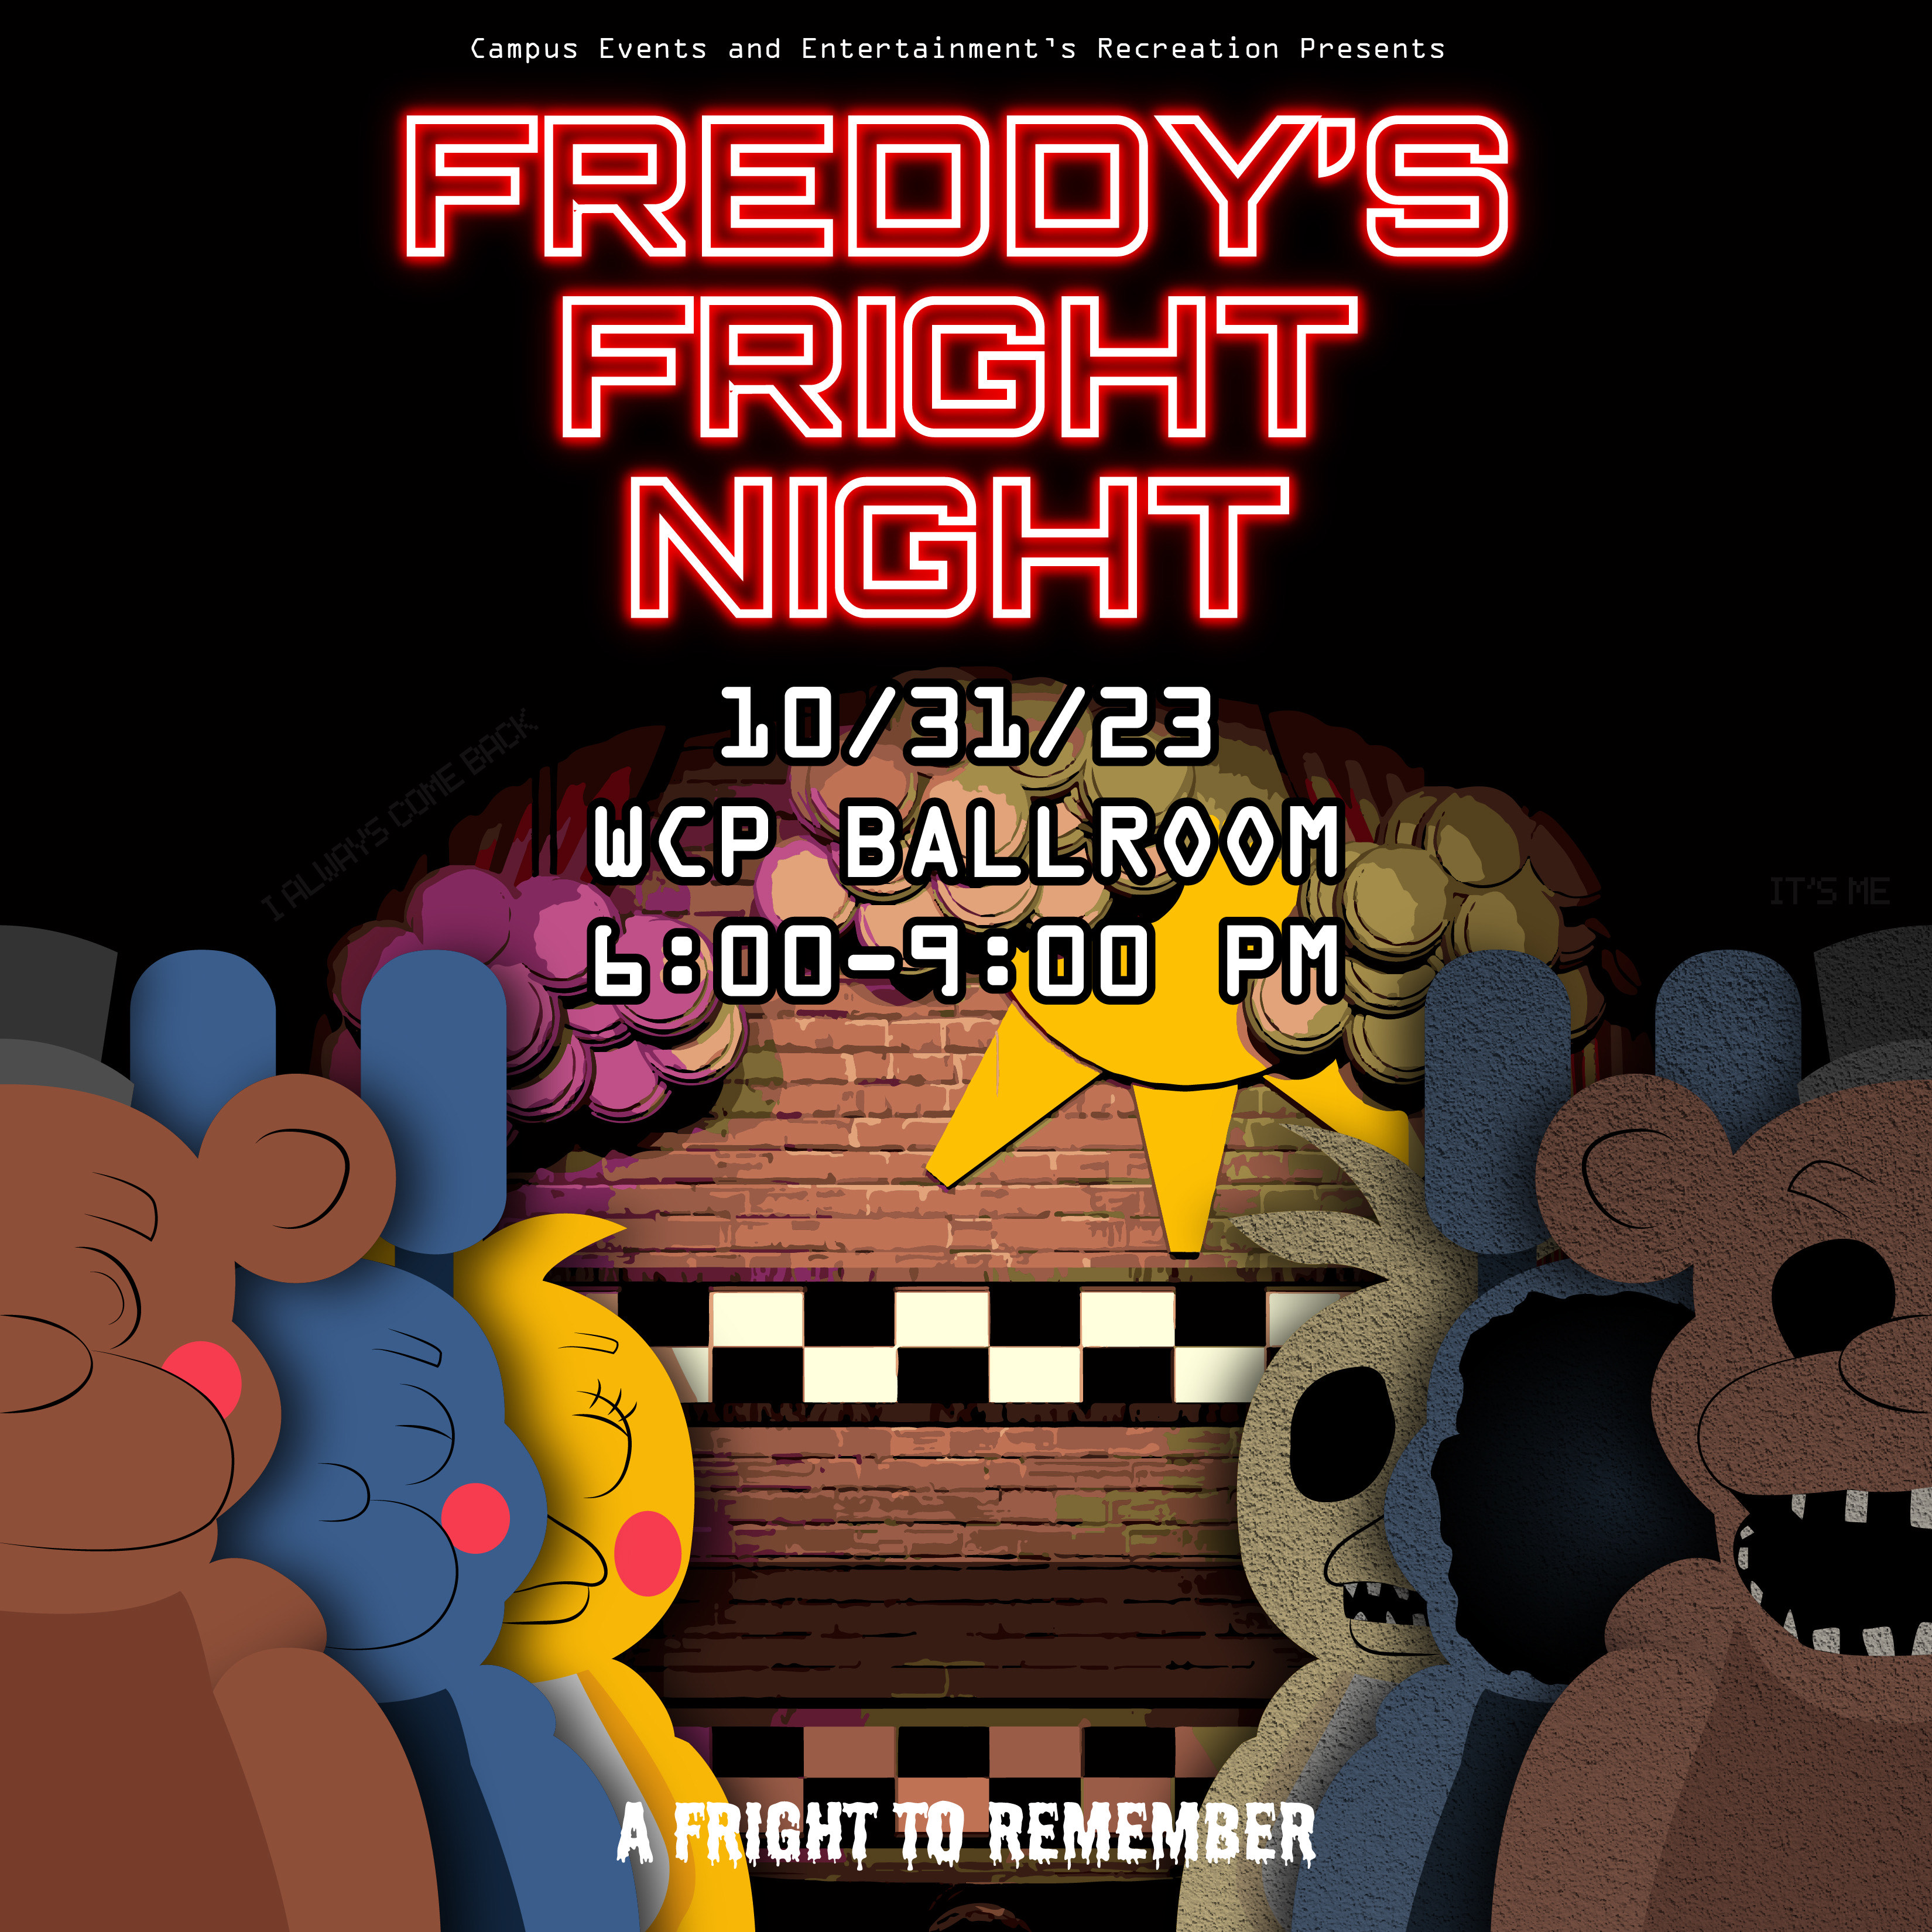 Poster advertising Freddy's Fright Night with animatronic bears